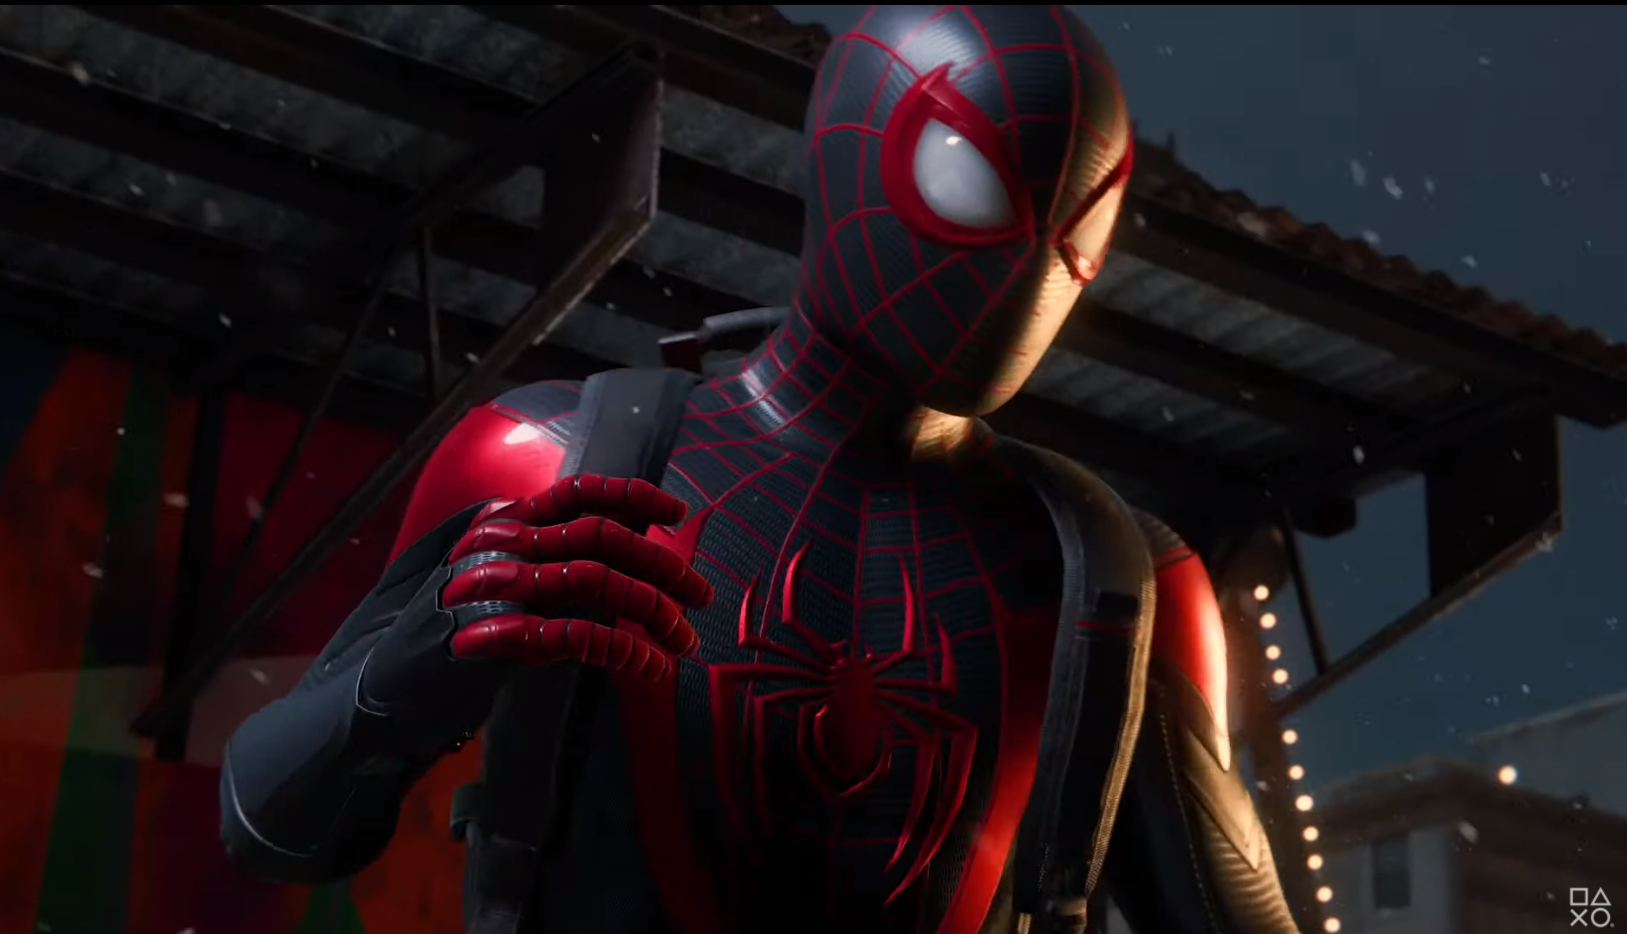 SpiderMan Miles Morales release date, trailers, story and gameplay